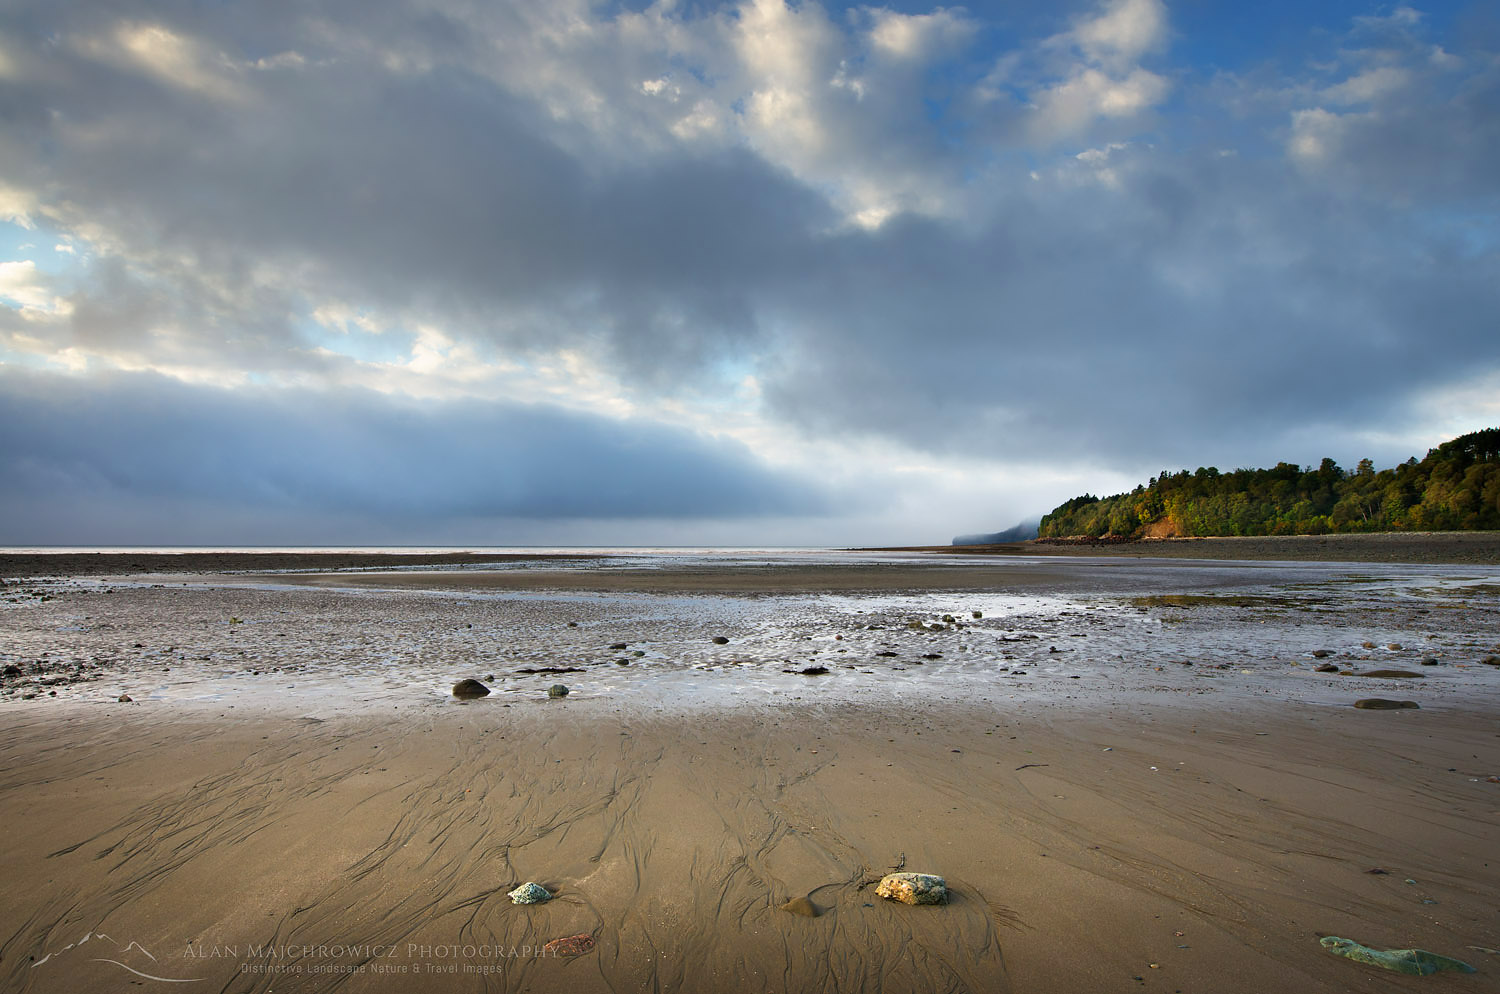 Bay of Fundy low tide, seen from beach at Alma New Brunswick #58545